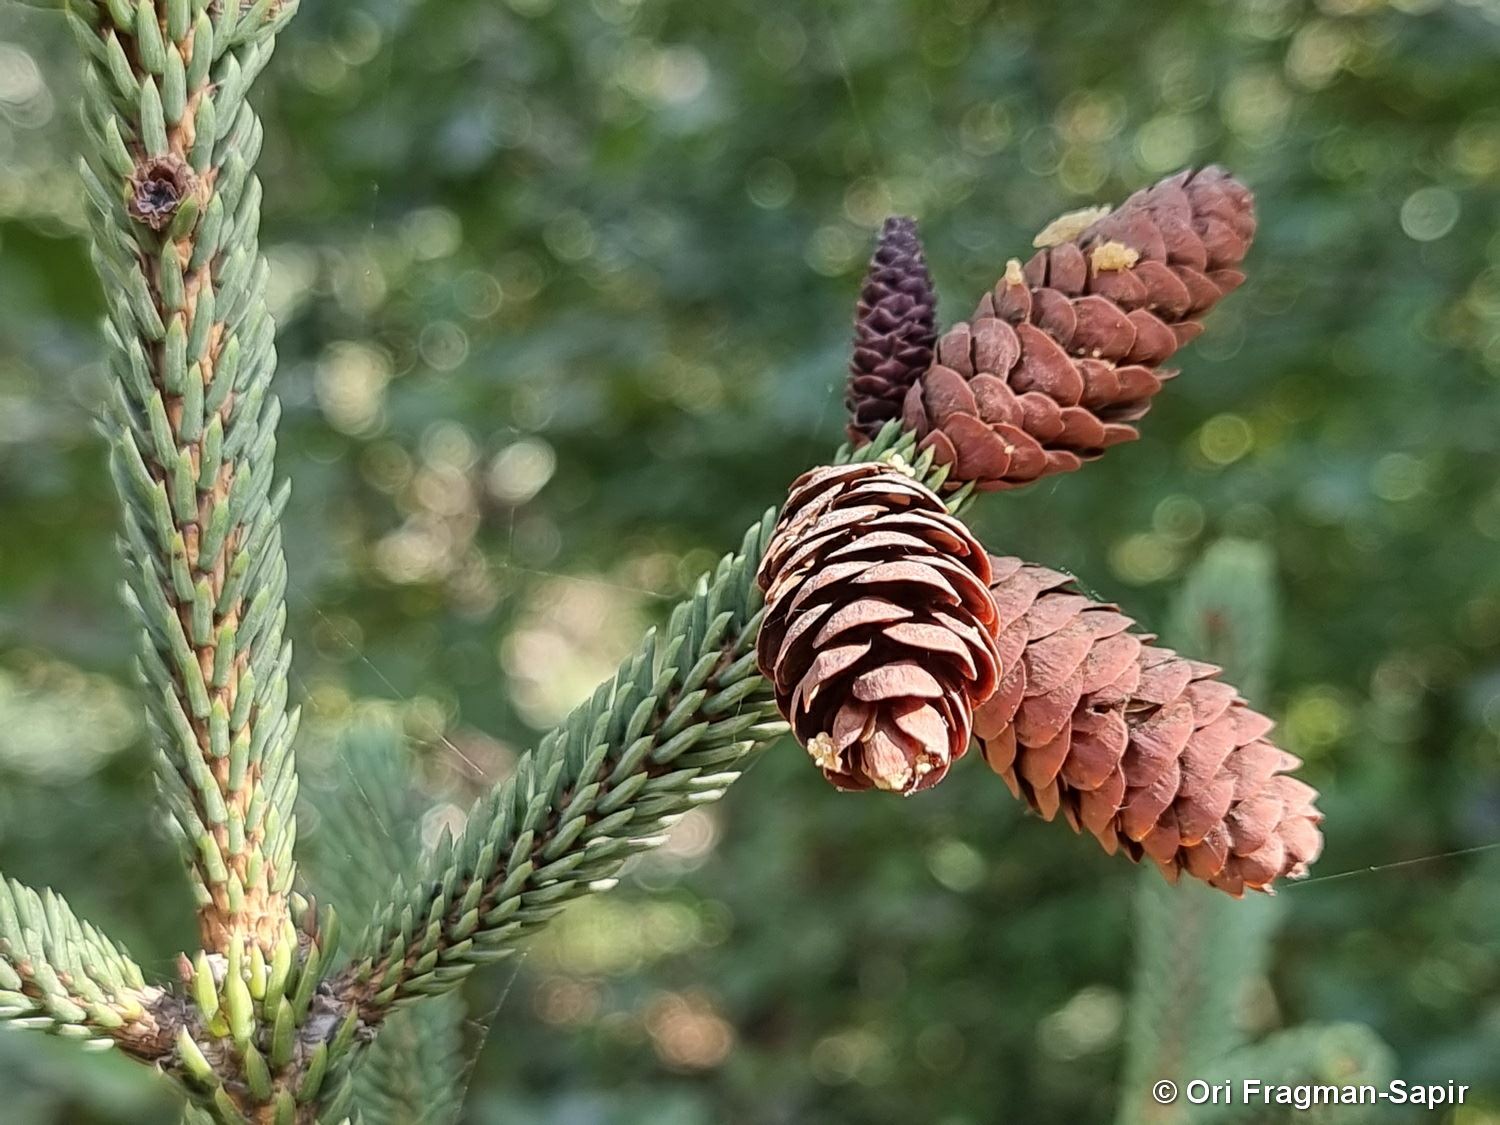 Picea abies - Norway Spruce, Common Spruce, אשוחית גבוהה, אשוחית גבוהה